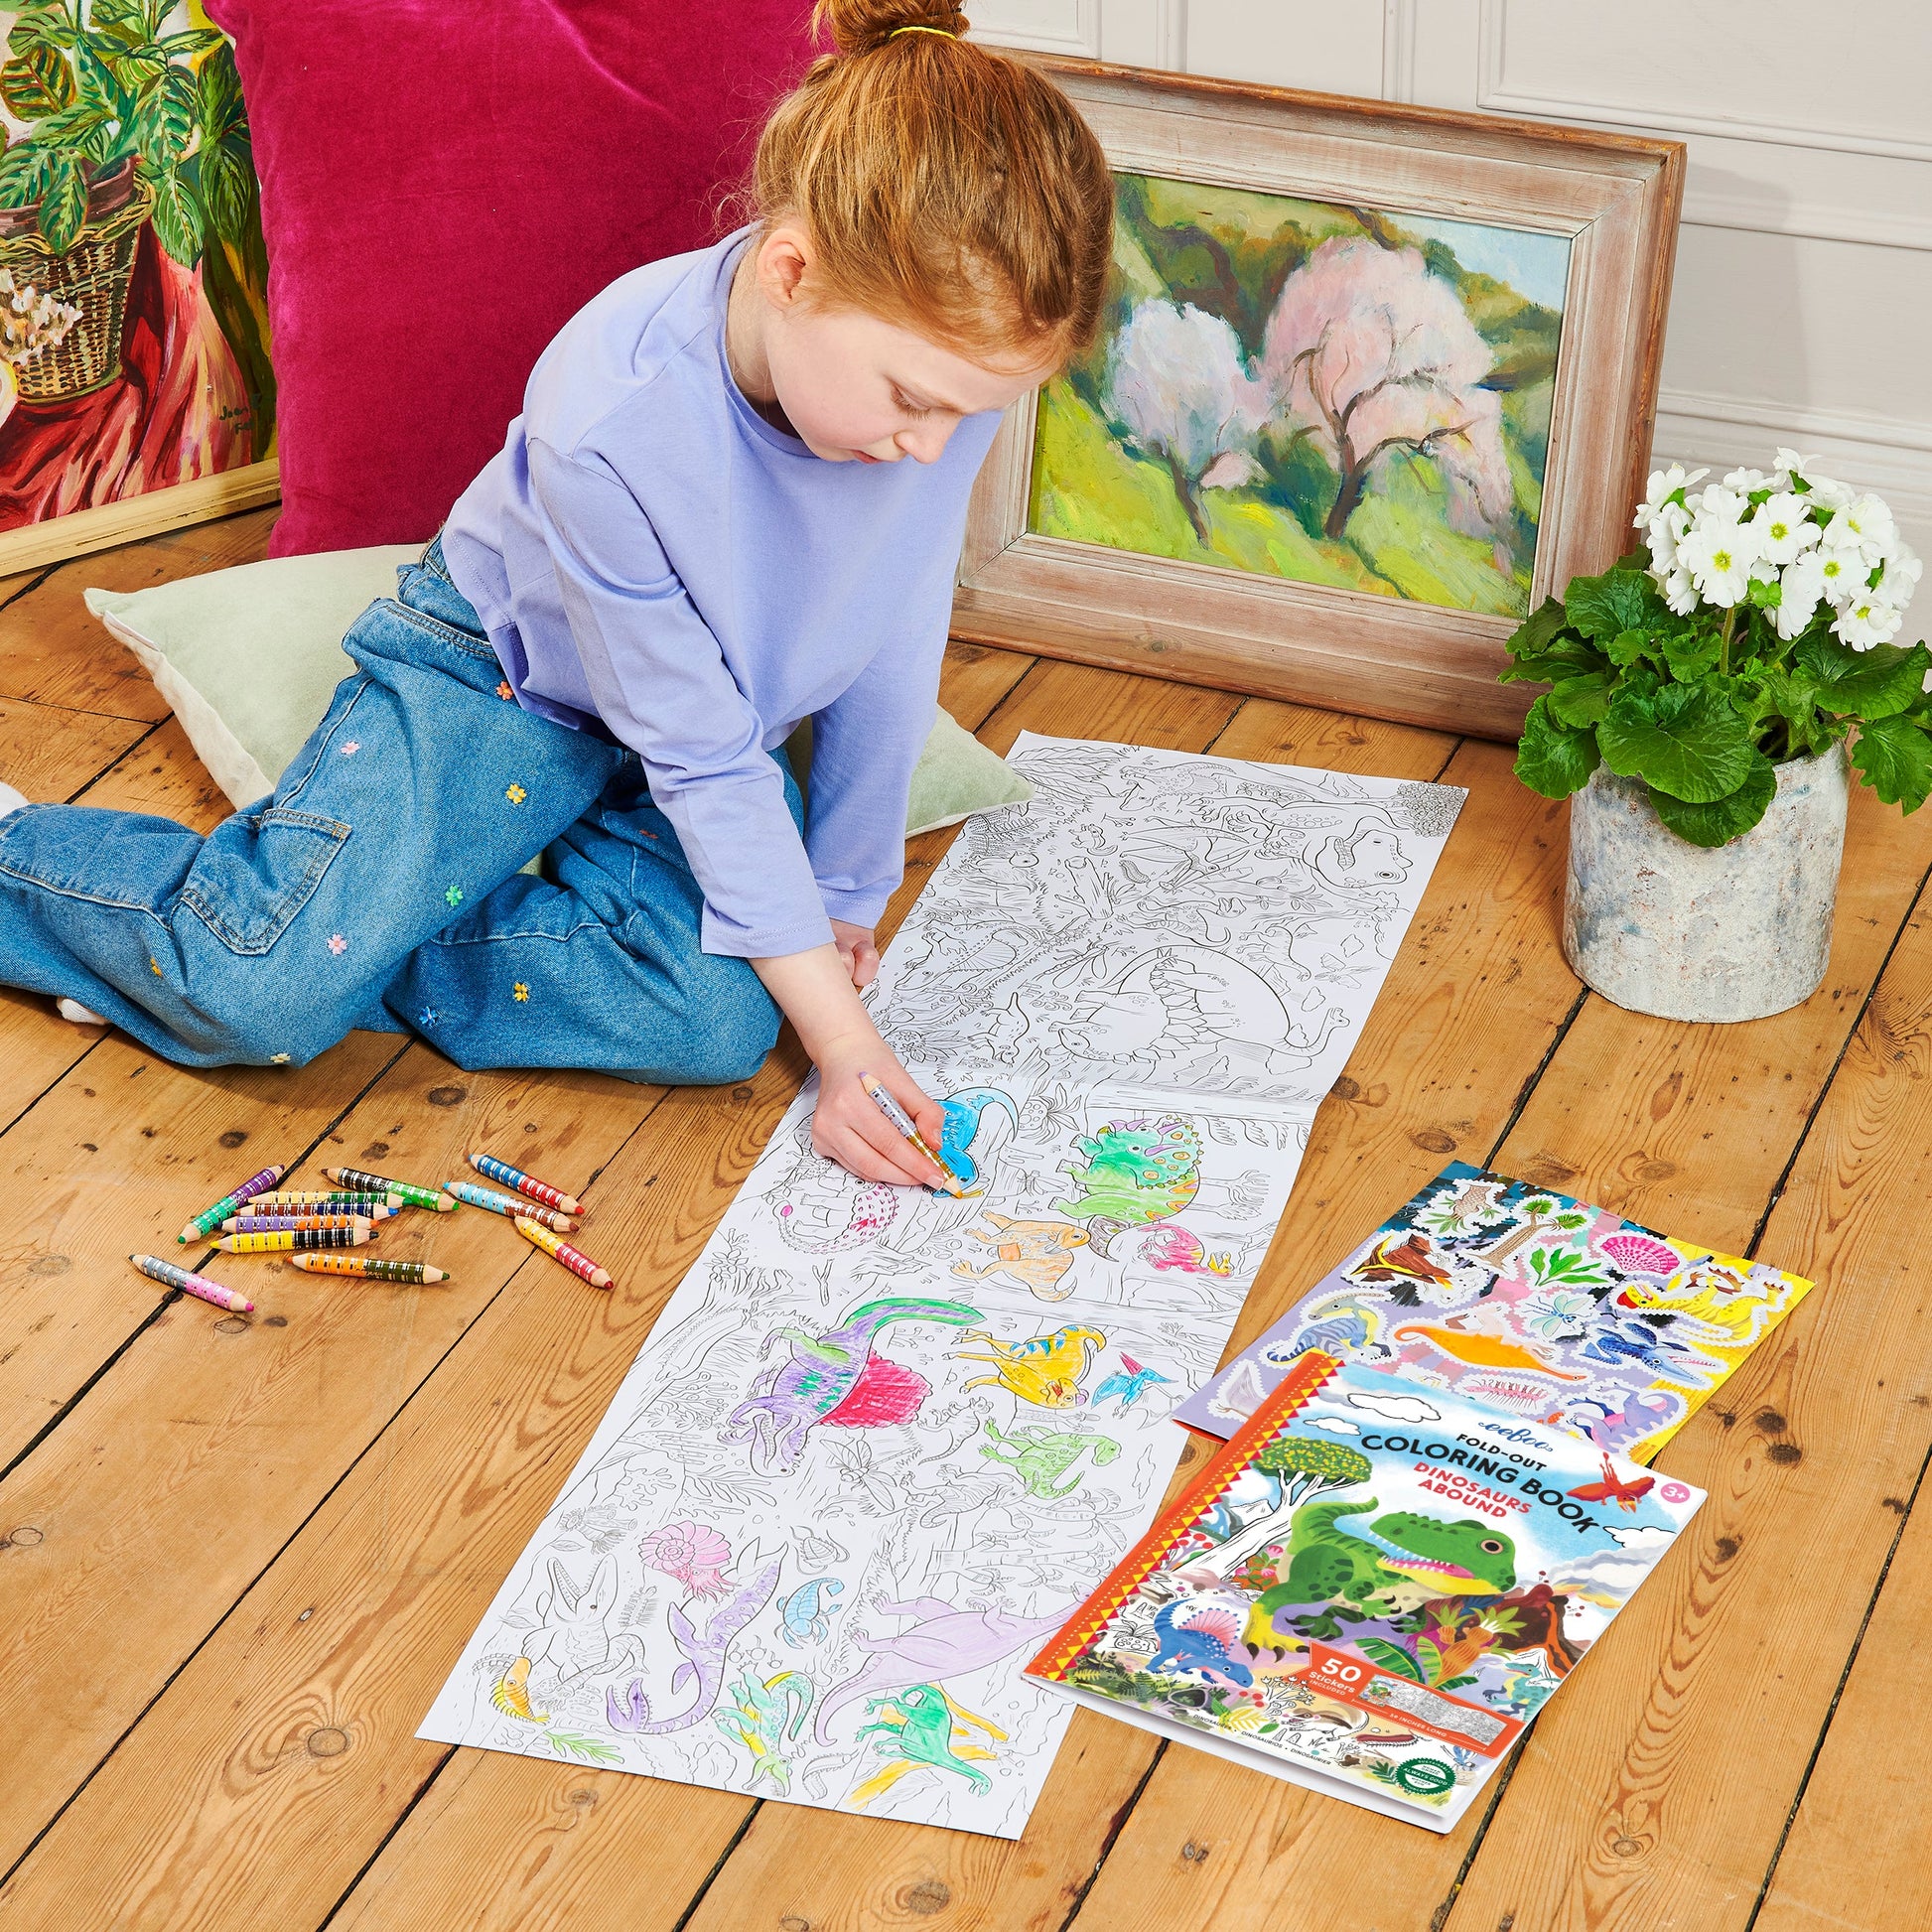 Fold-Out Coloring Book - Dinosaurs Abound by eeBoo | Unique Fun Gifts